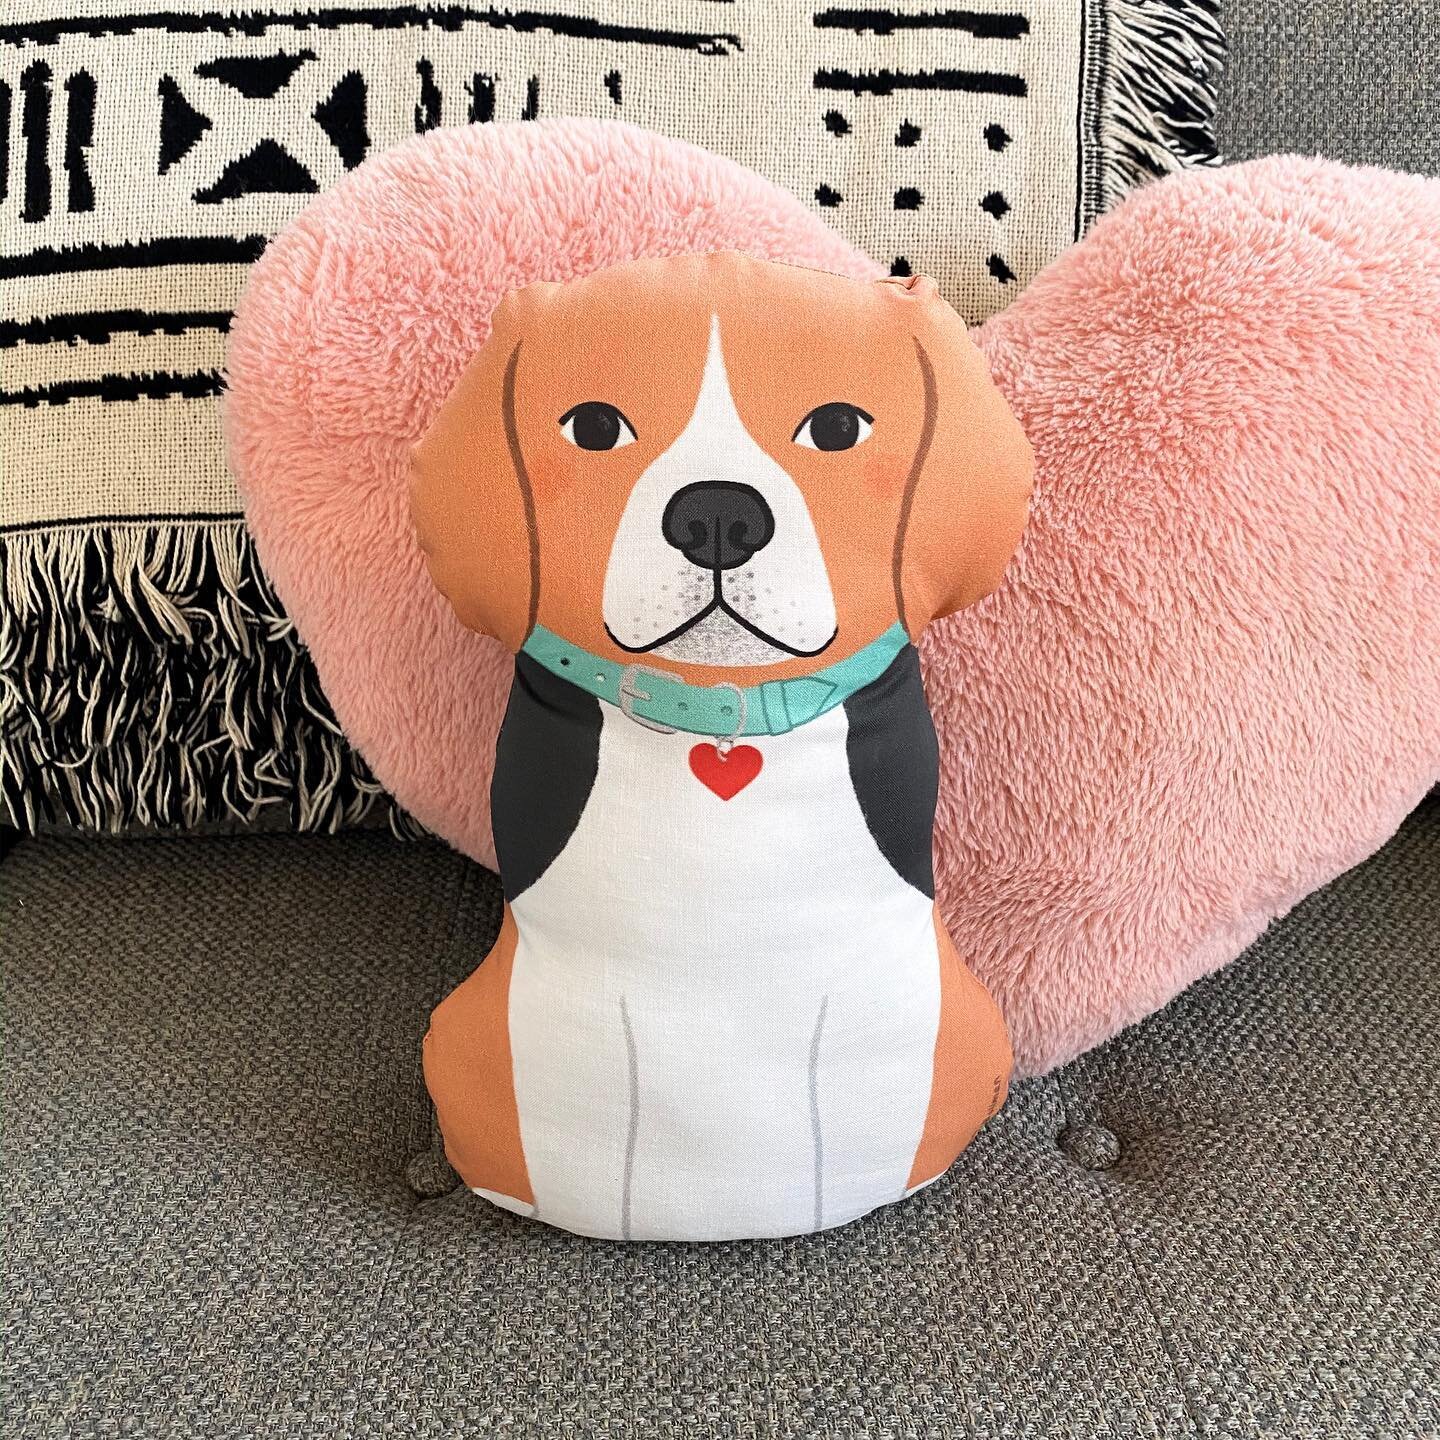 The new release of cut and sew dogs, including this fellow, are now available on Spoonflower! Link in profile. 🐶
.
.
.
.
.
.
.
.
.
#beagle #beaglesofinstagram #beaglelove #beagles #beaglepillow #beagledoll #beagletoy #dogillustration #cutandsew #cut